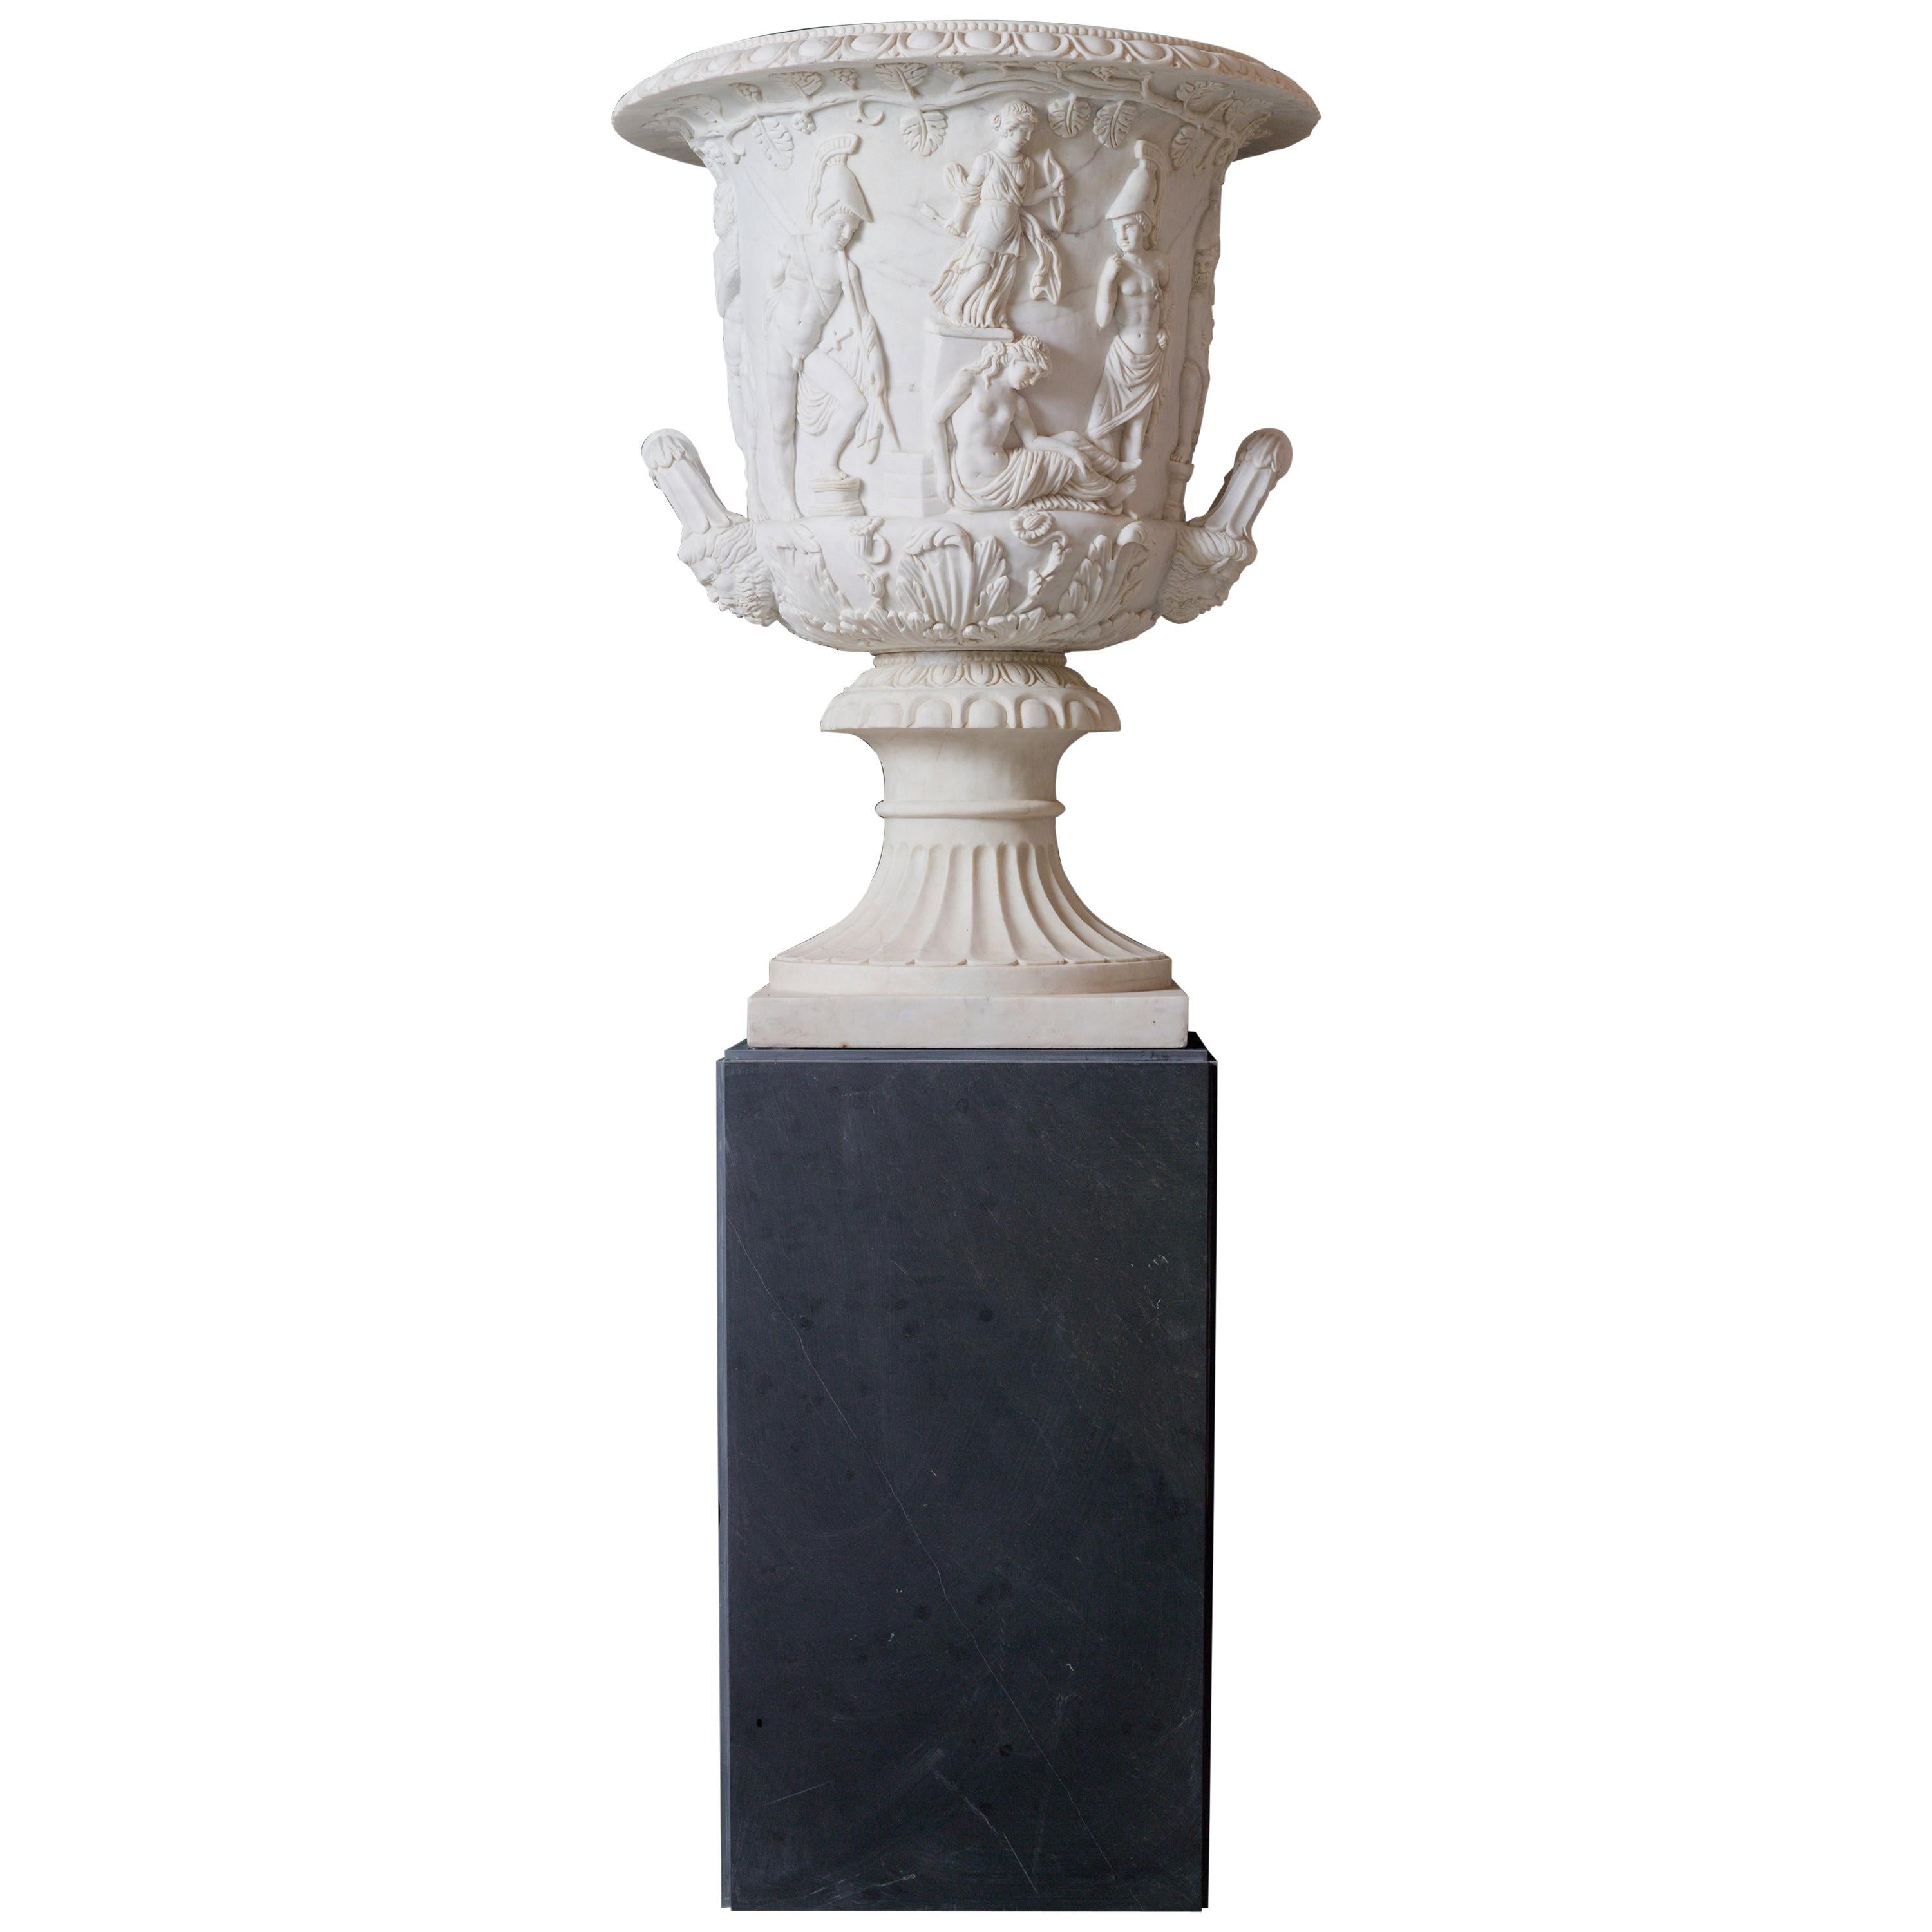 Italian Statuary White Marble Medici Vase after the Classical Greek For Sale